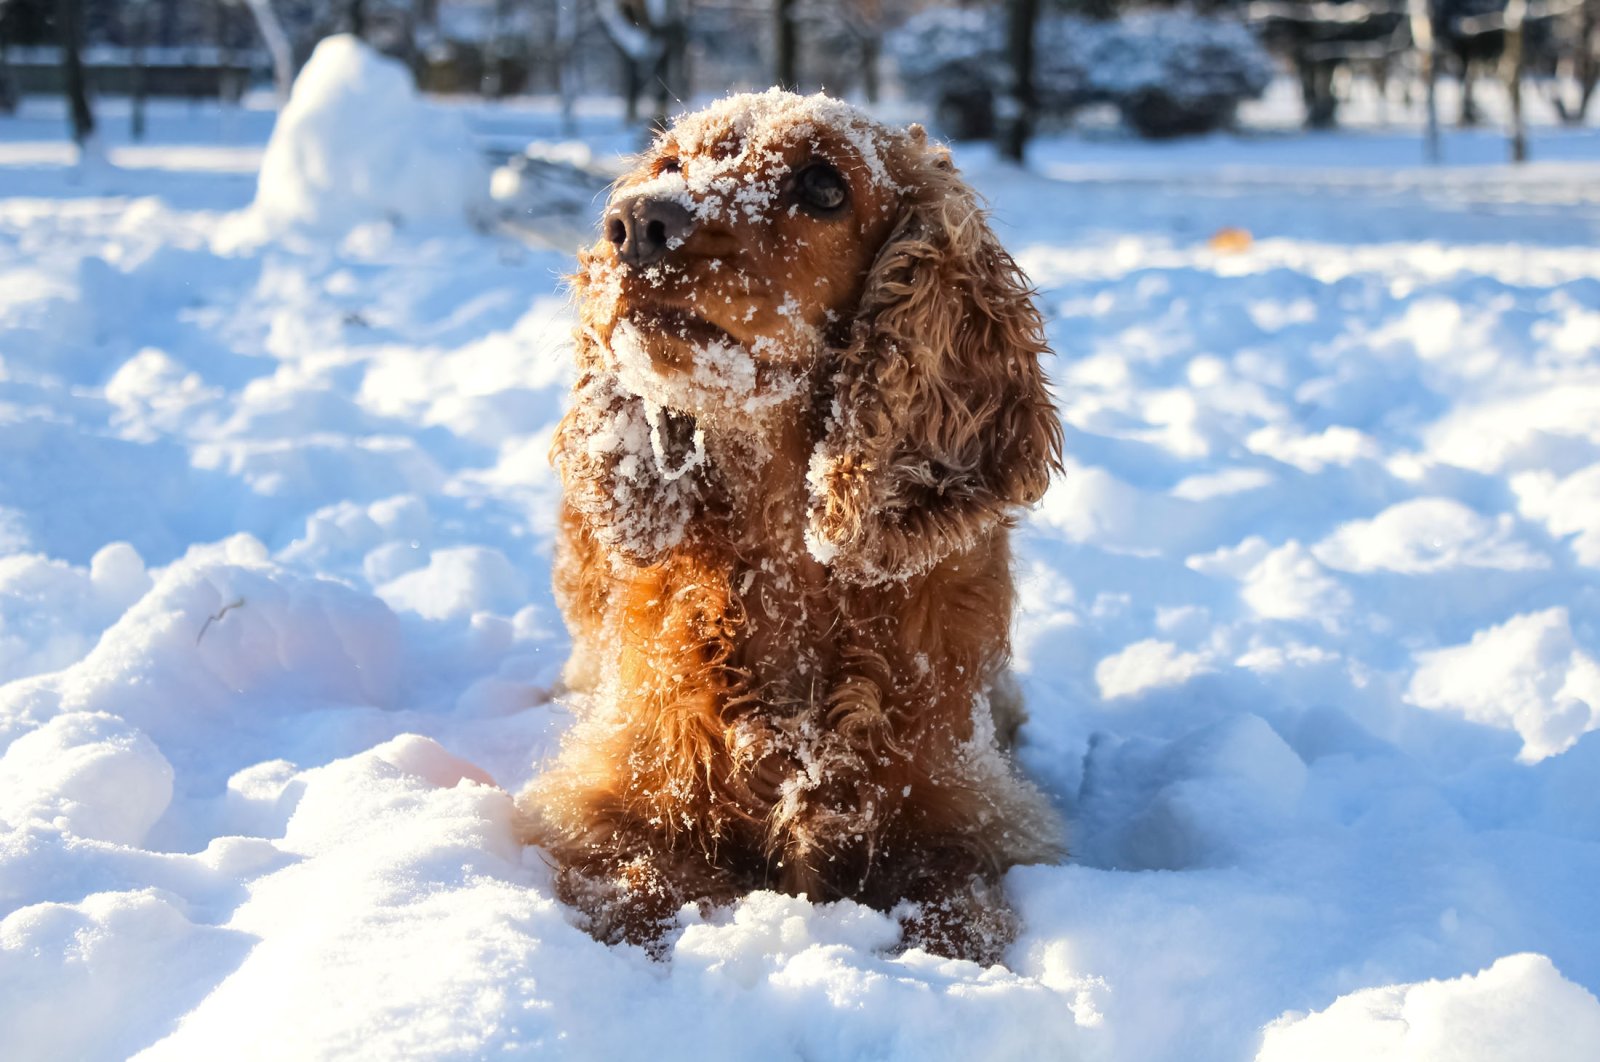 Brilliant hacks to prevent snow from sticking to your dog's fur | Daily Sabah
